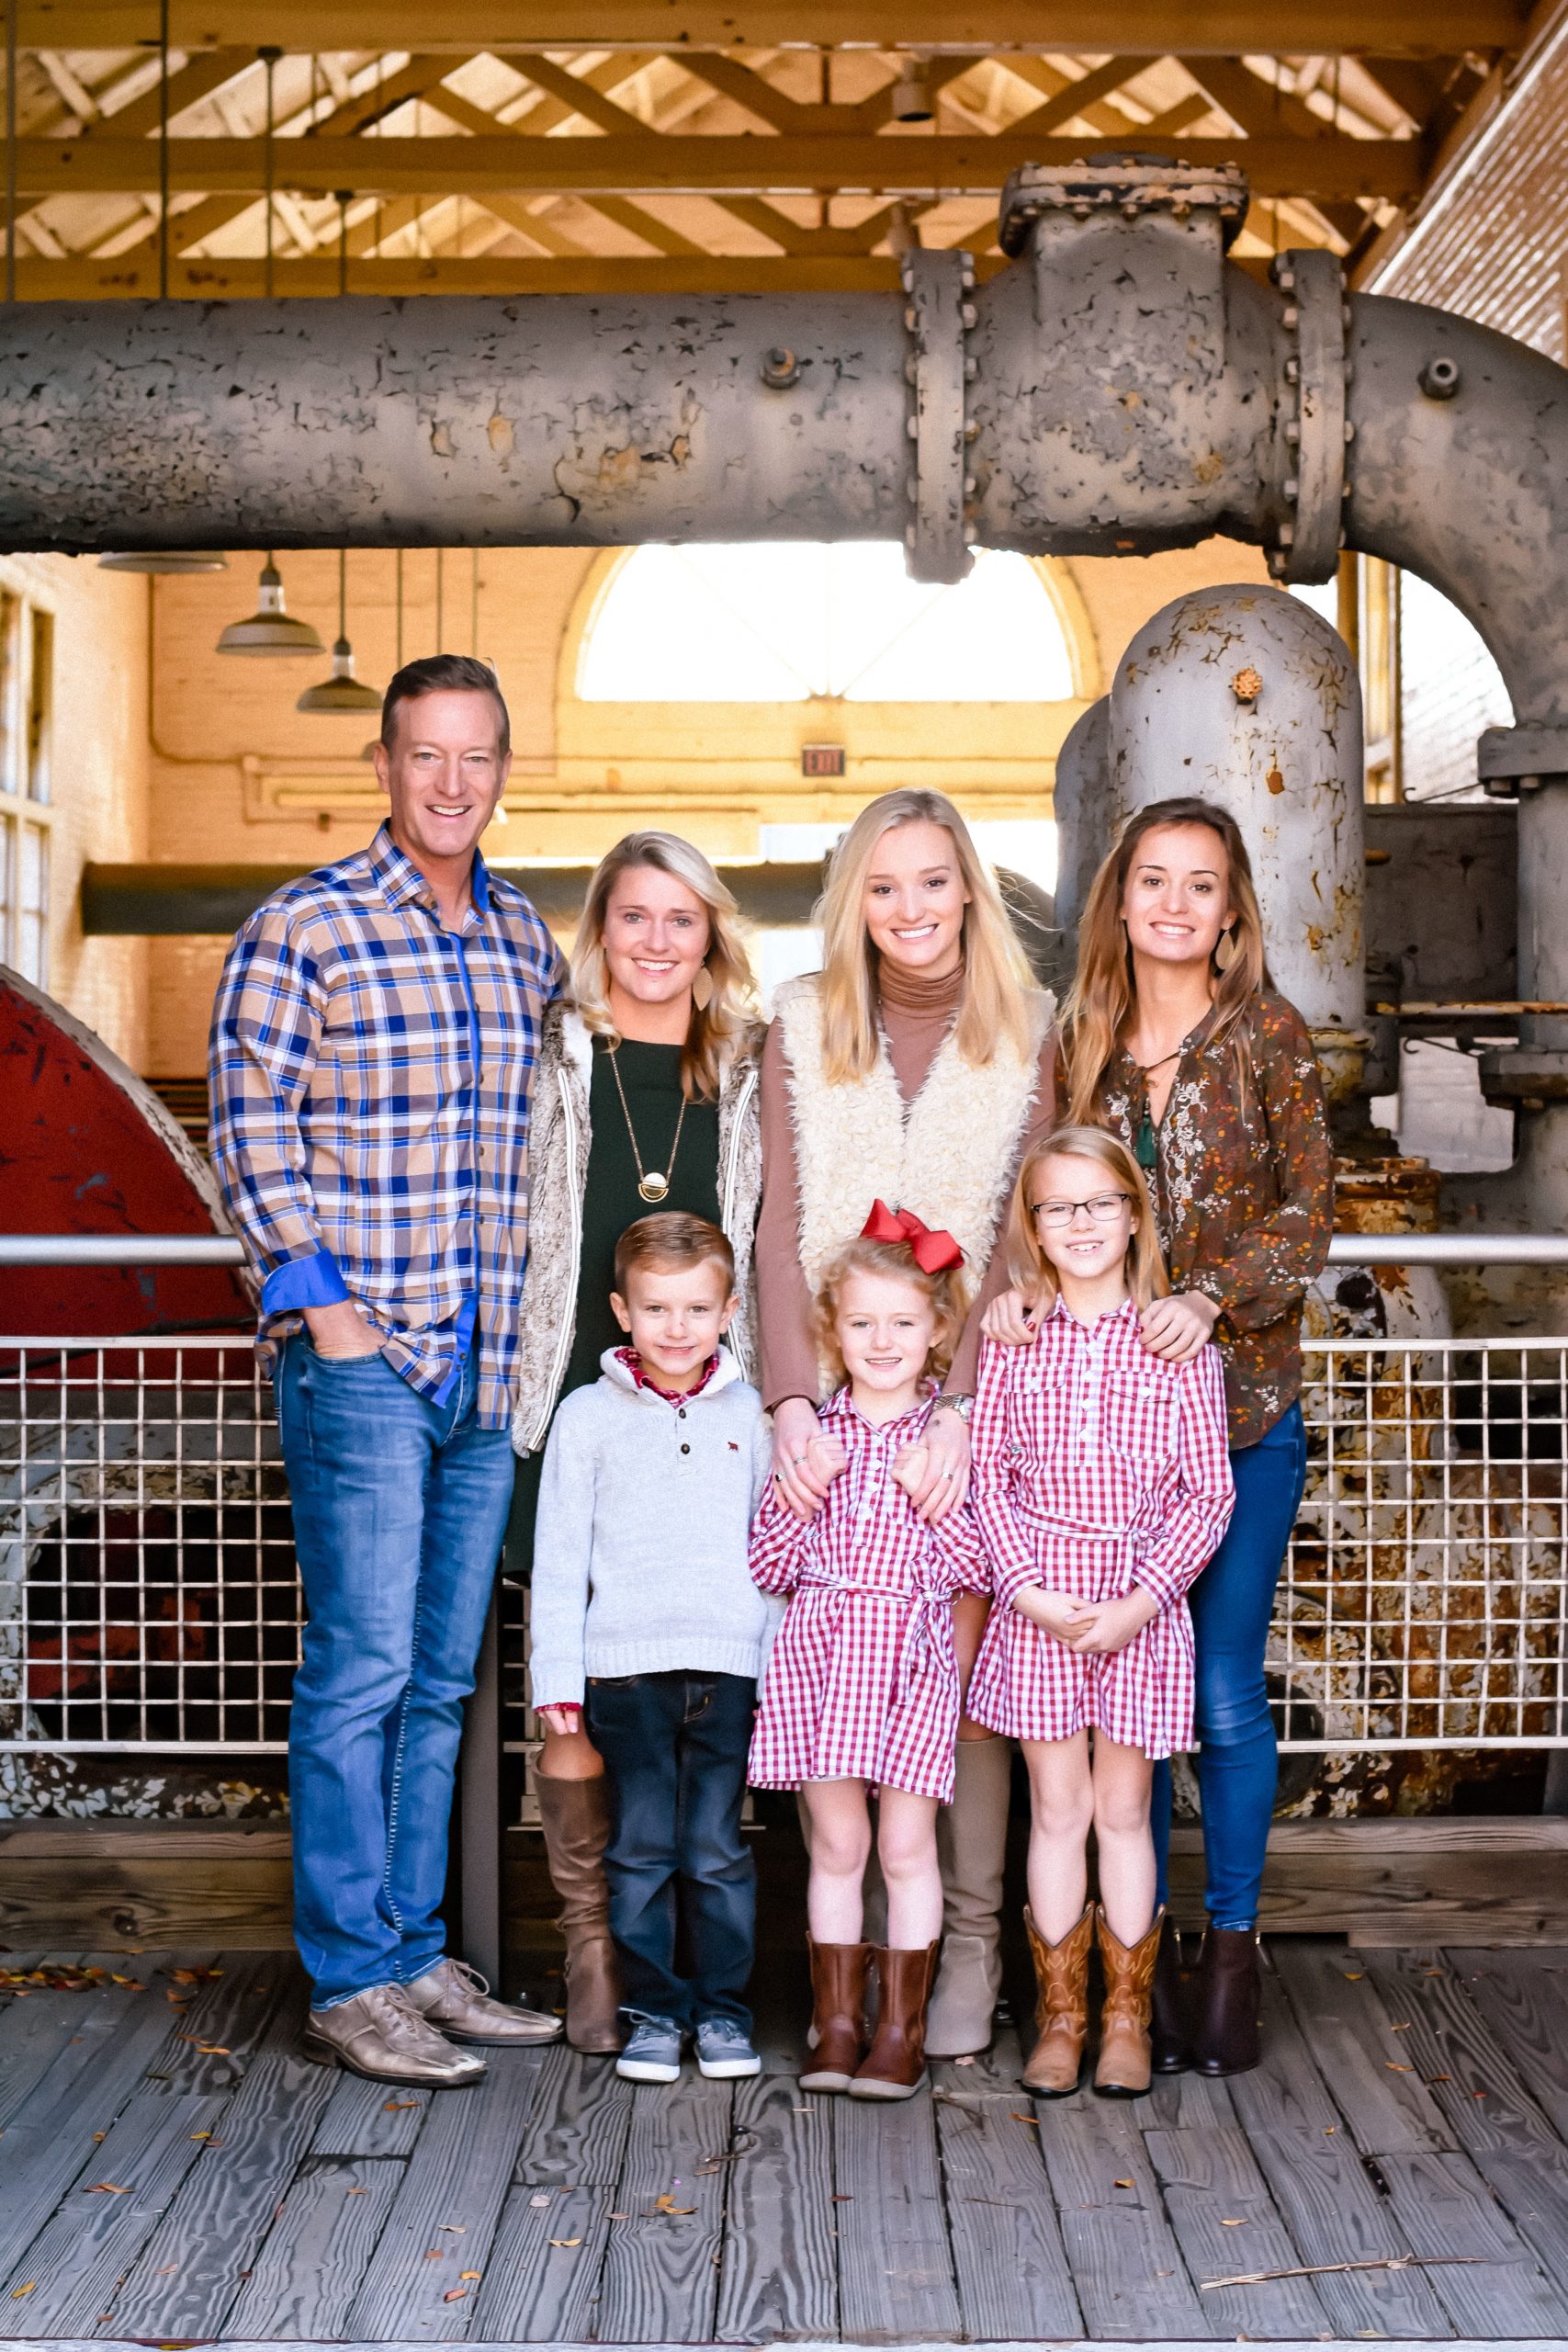 Steve and Kathy Ware with their children, Alexis, Allison, Preston, Blakely, and Kinleigh.